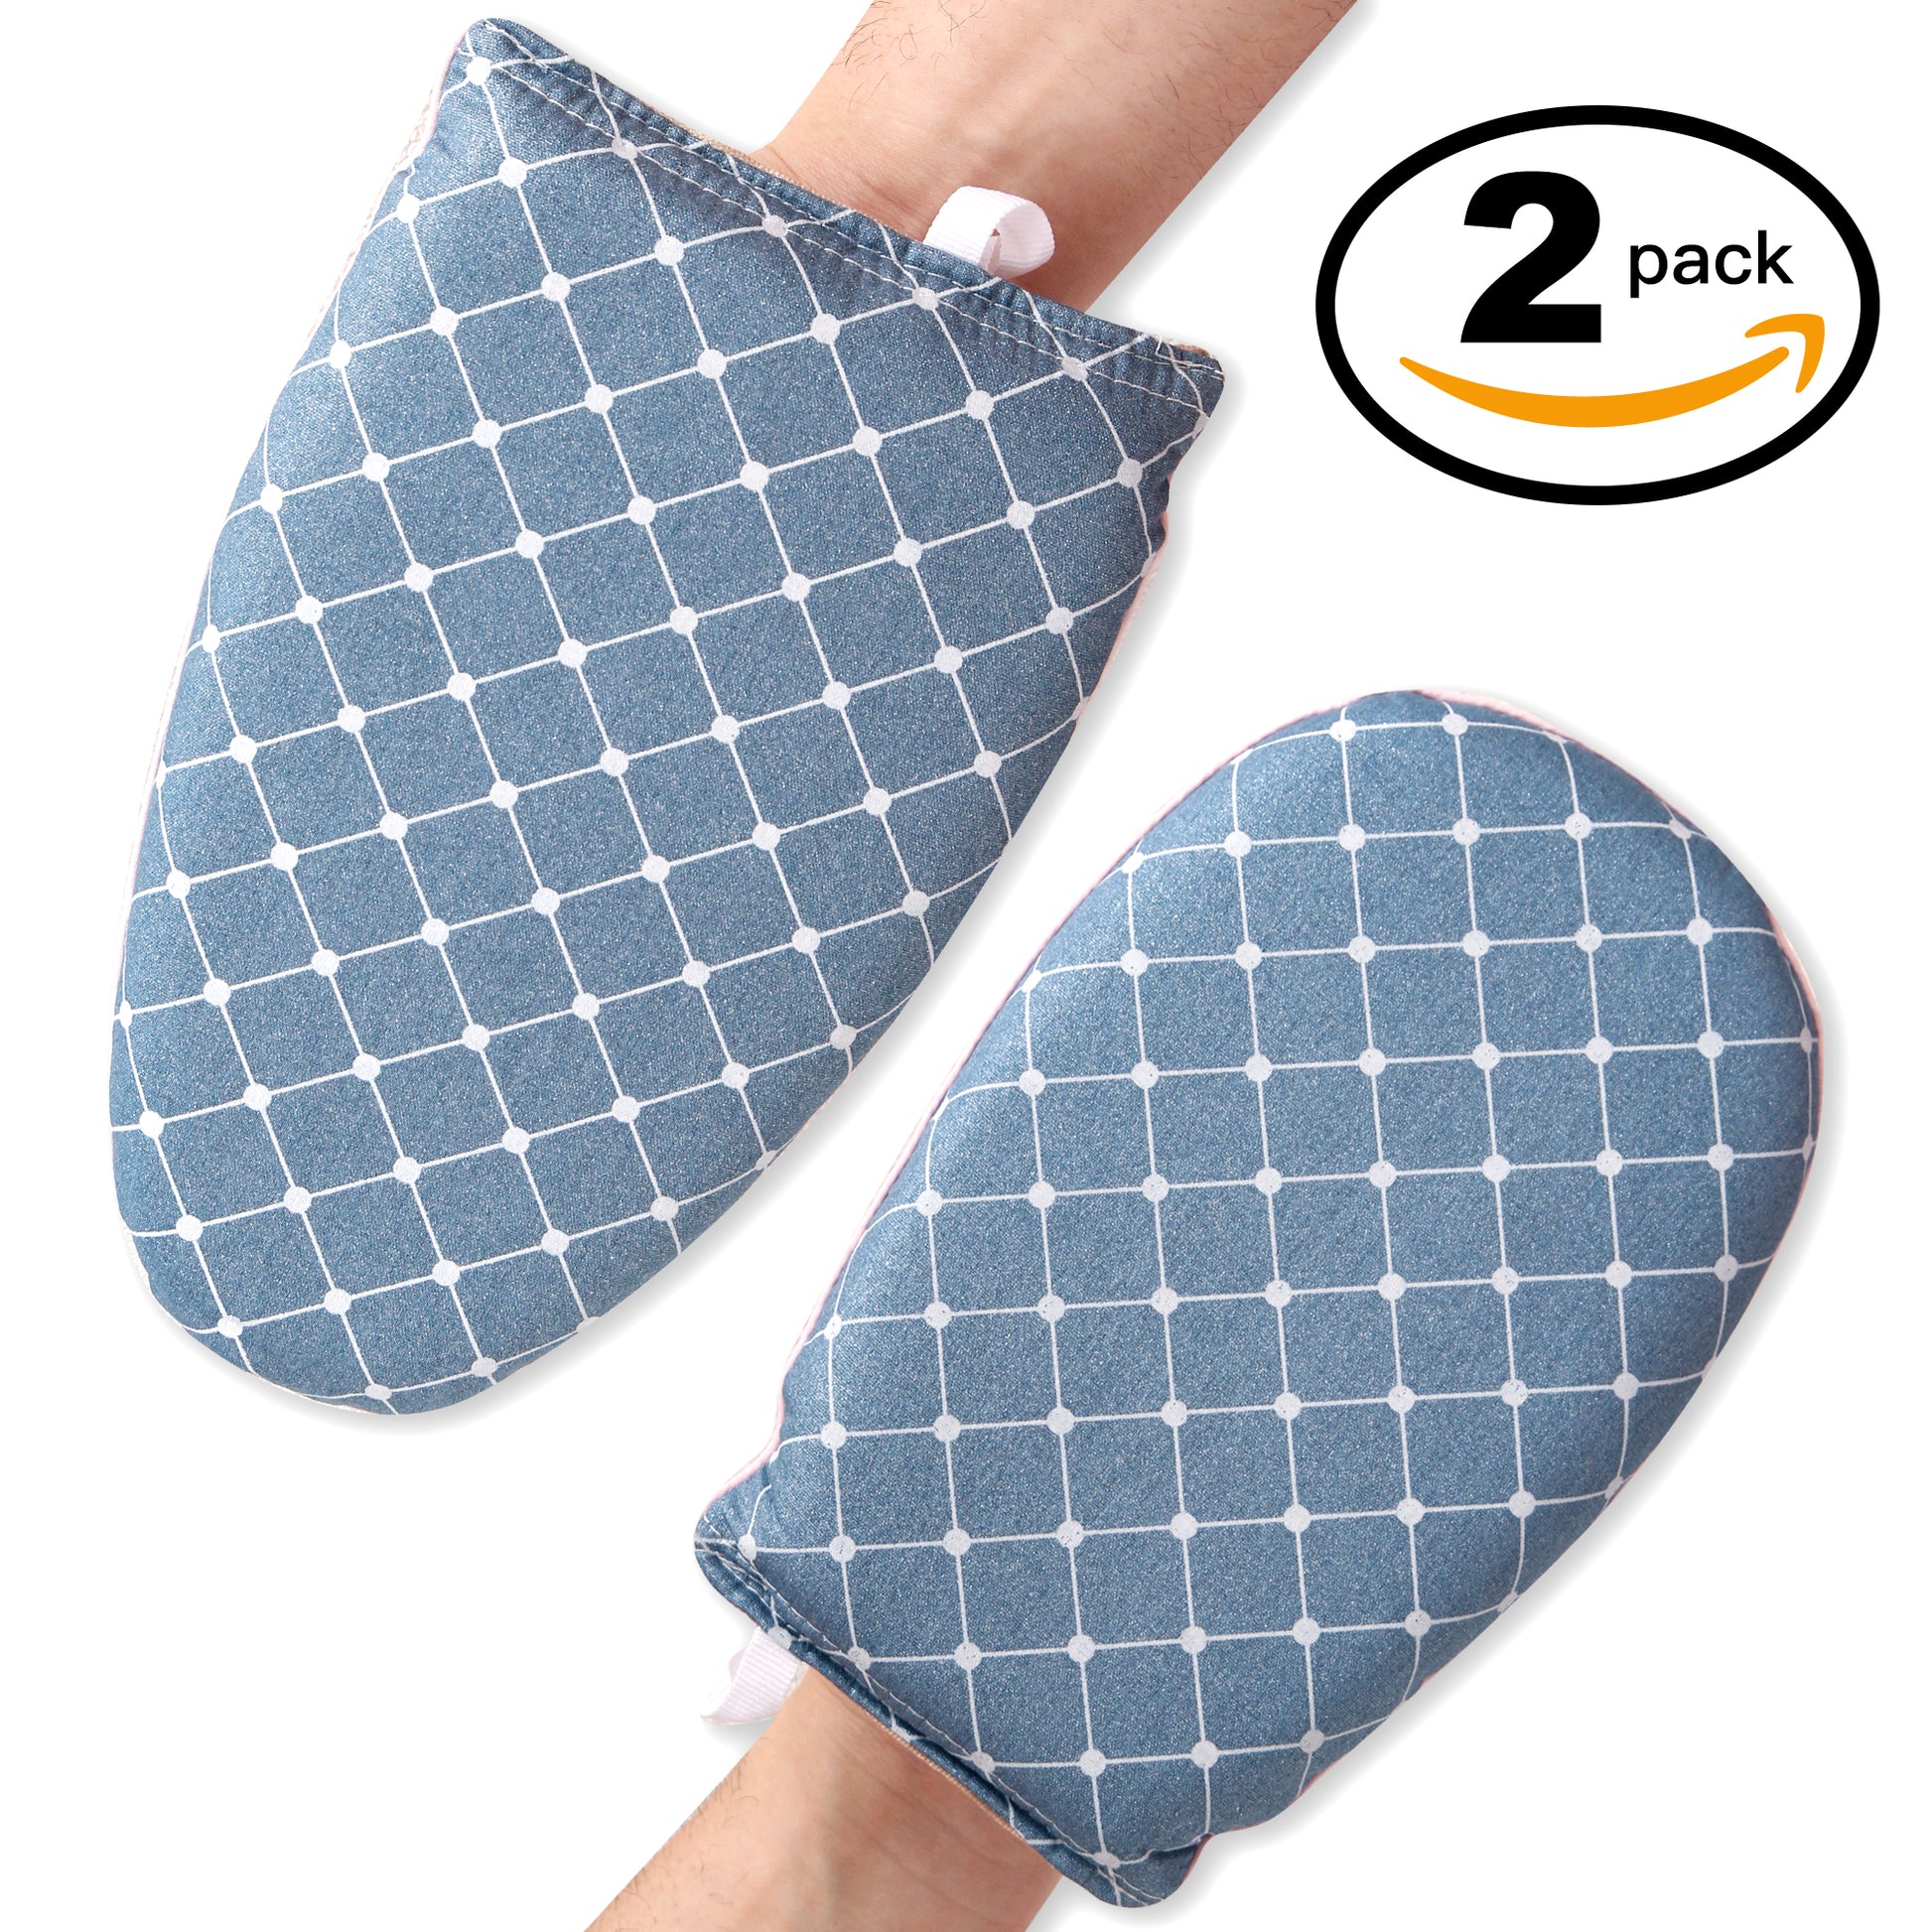 1pc Mini Ironing Board Glove Grey Polyester Anti-scald Suitable for Ironing  Clothes